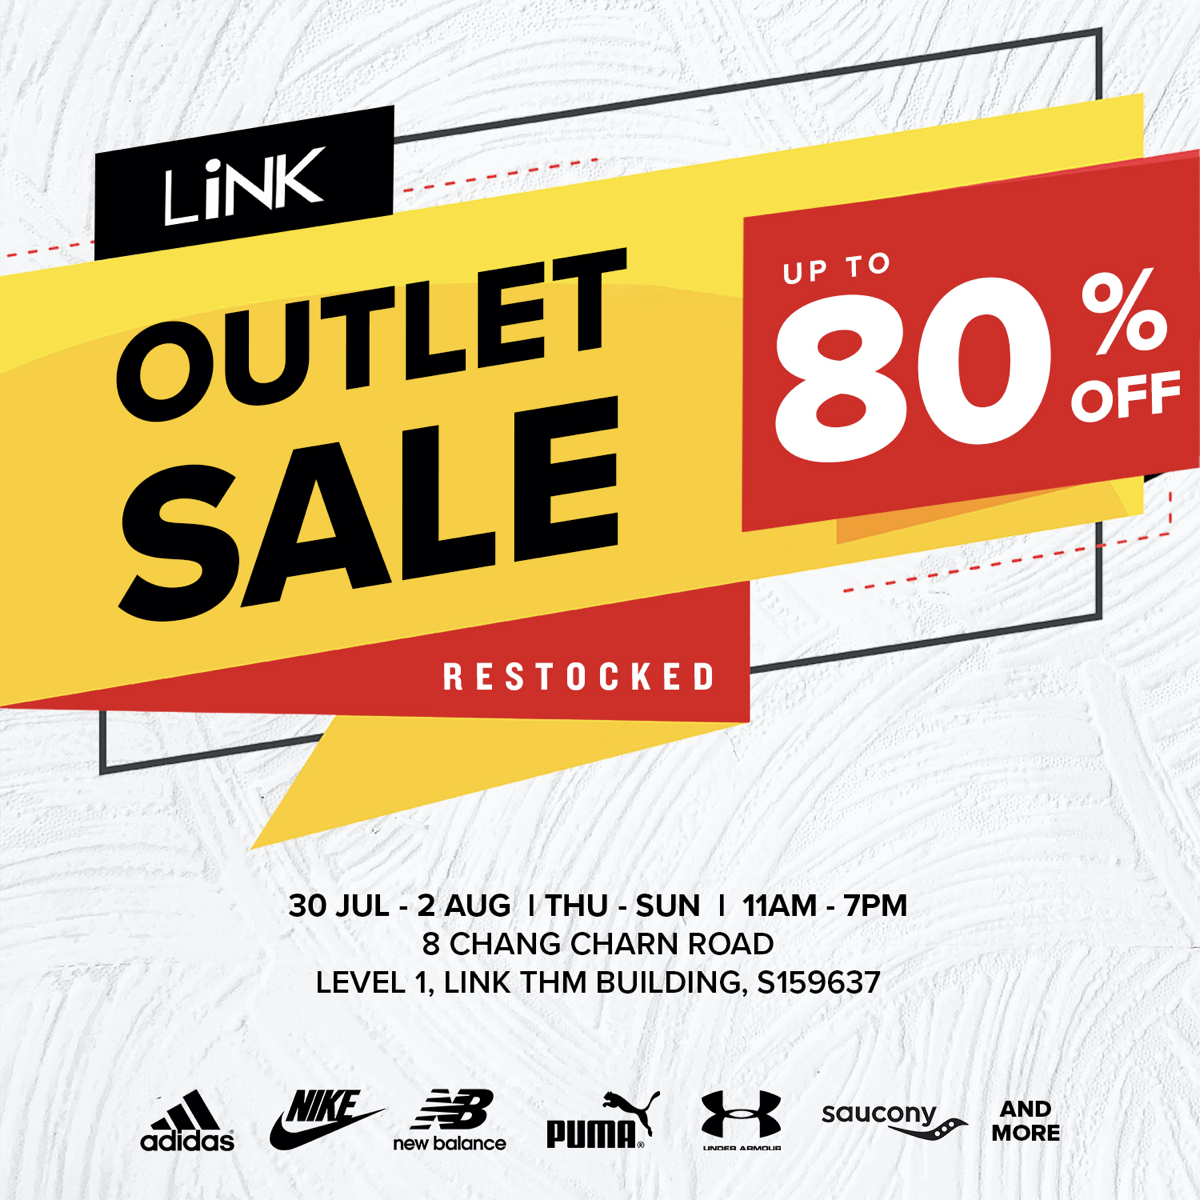 LINK Outlet Sale has up to 80% off branded shoes, bags, accessories & more (30 Jul – 2 Aug 2020) - 1